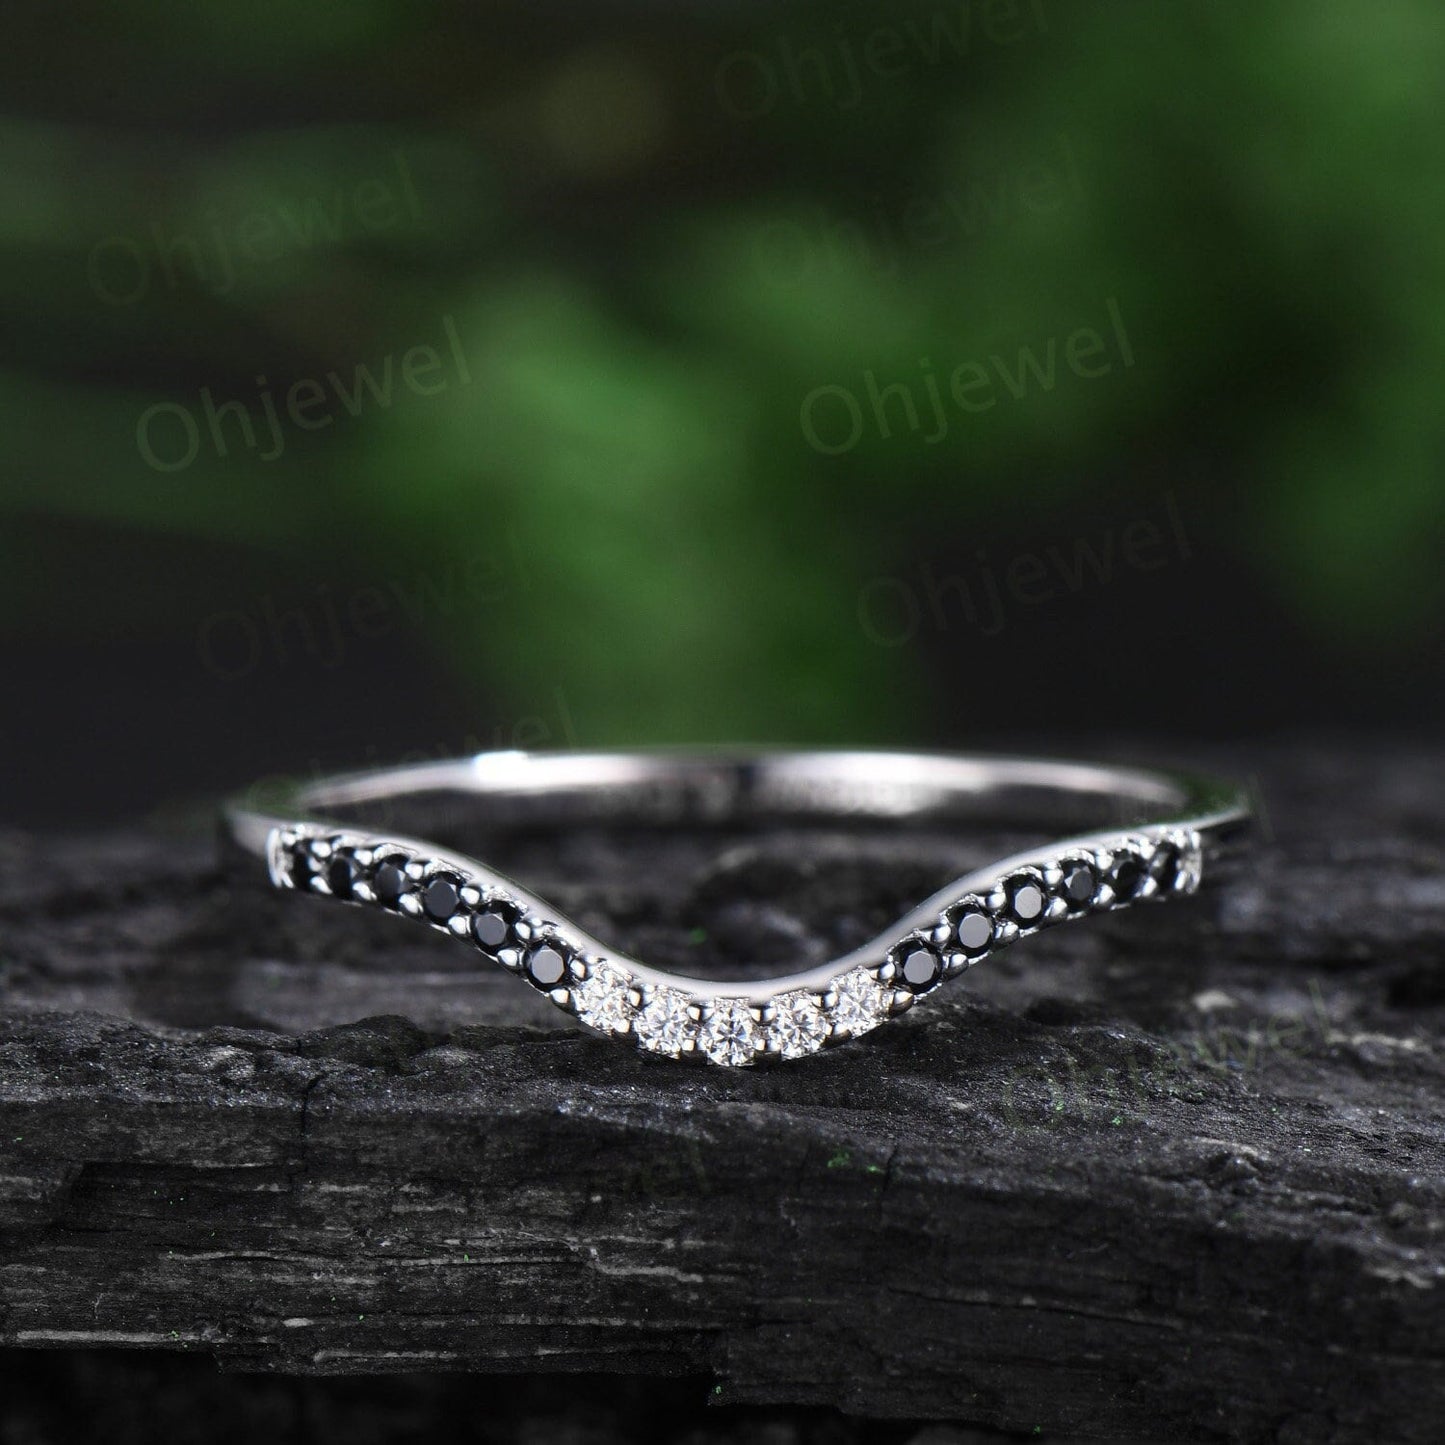 Curved black diamond wedding band solid 14k white gold stacking matching moissanite bridal anniversary ring women gift jewelry